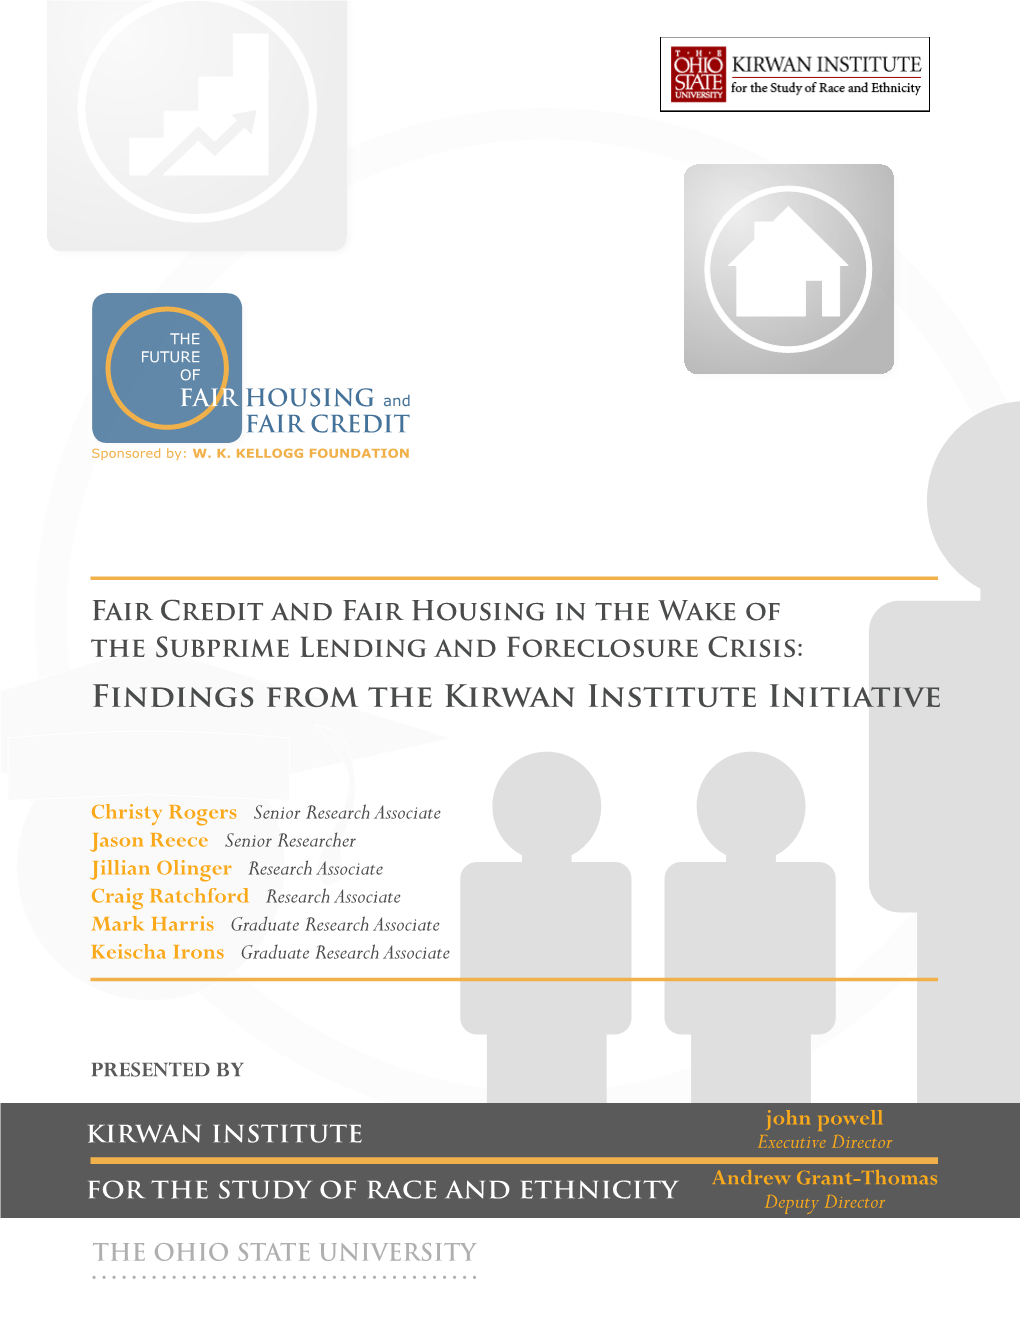 Fair Credit and Fair Housing in the Wake of the Subprime Lending and Foreclosure Crisis: Findings from the Kirwan Institute Initiative